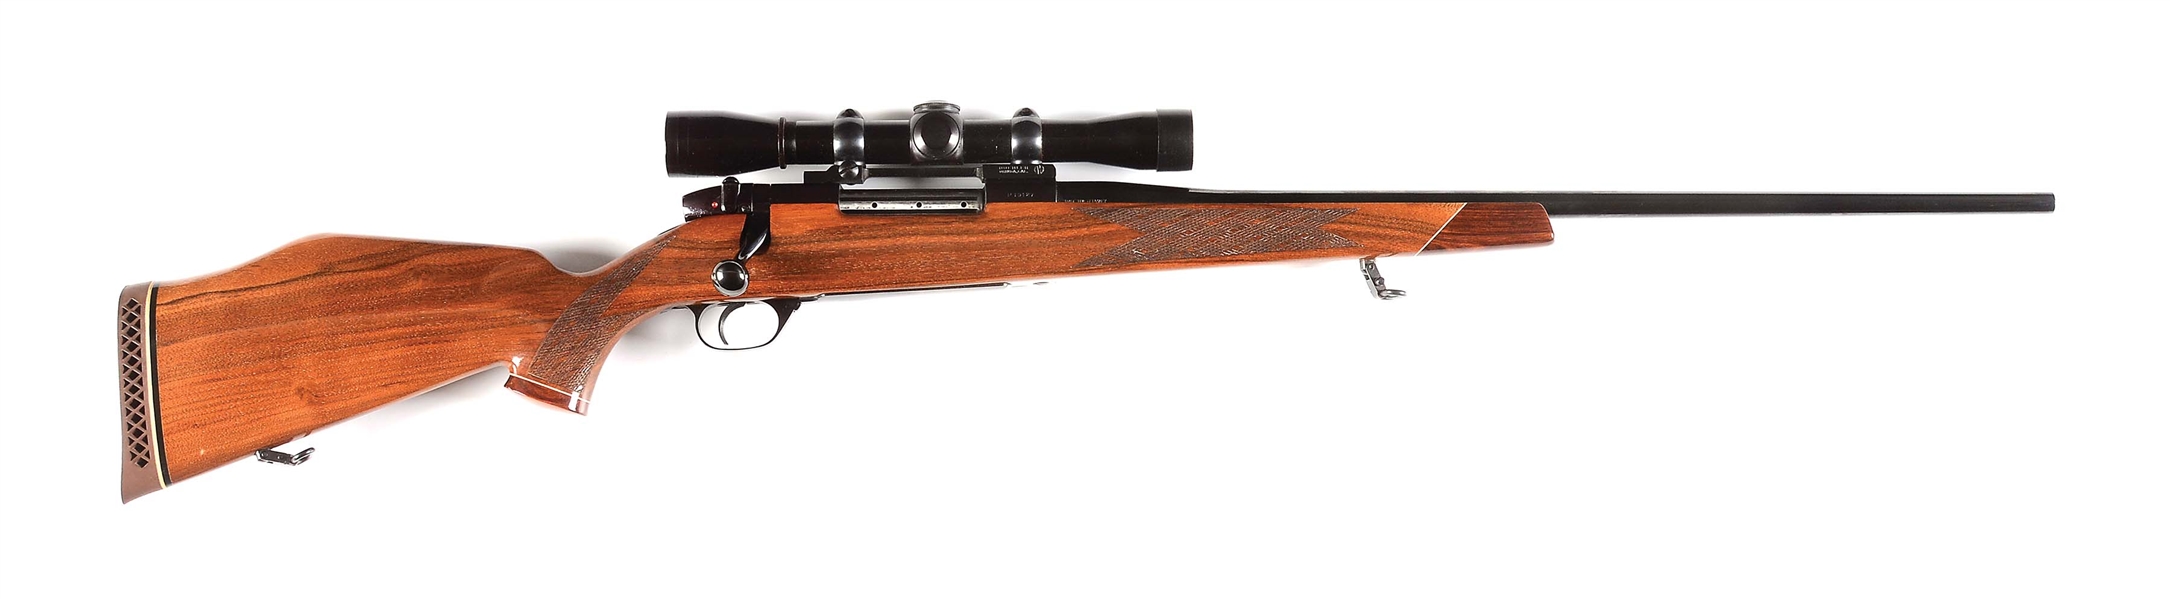 (M) WEATHERBY MARK V BOLT ACTION RIFLE IN .300 WEATHERBY MAGNUM.